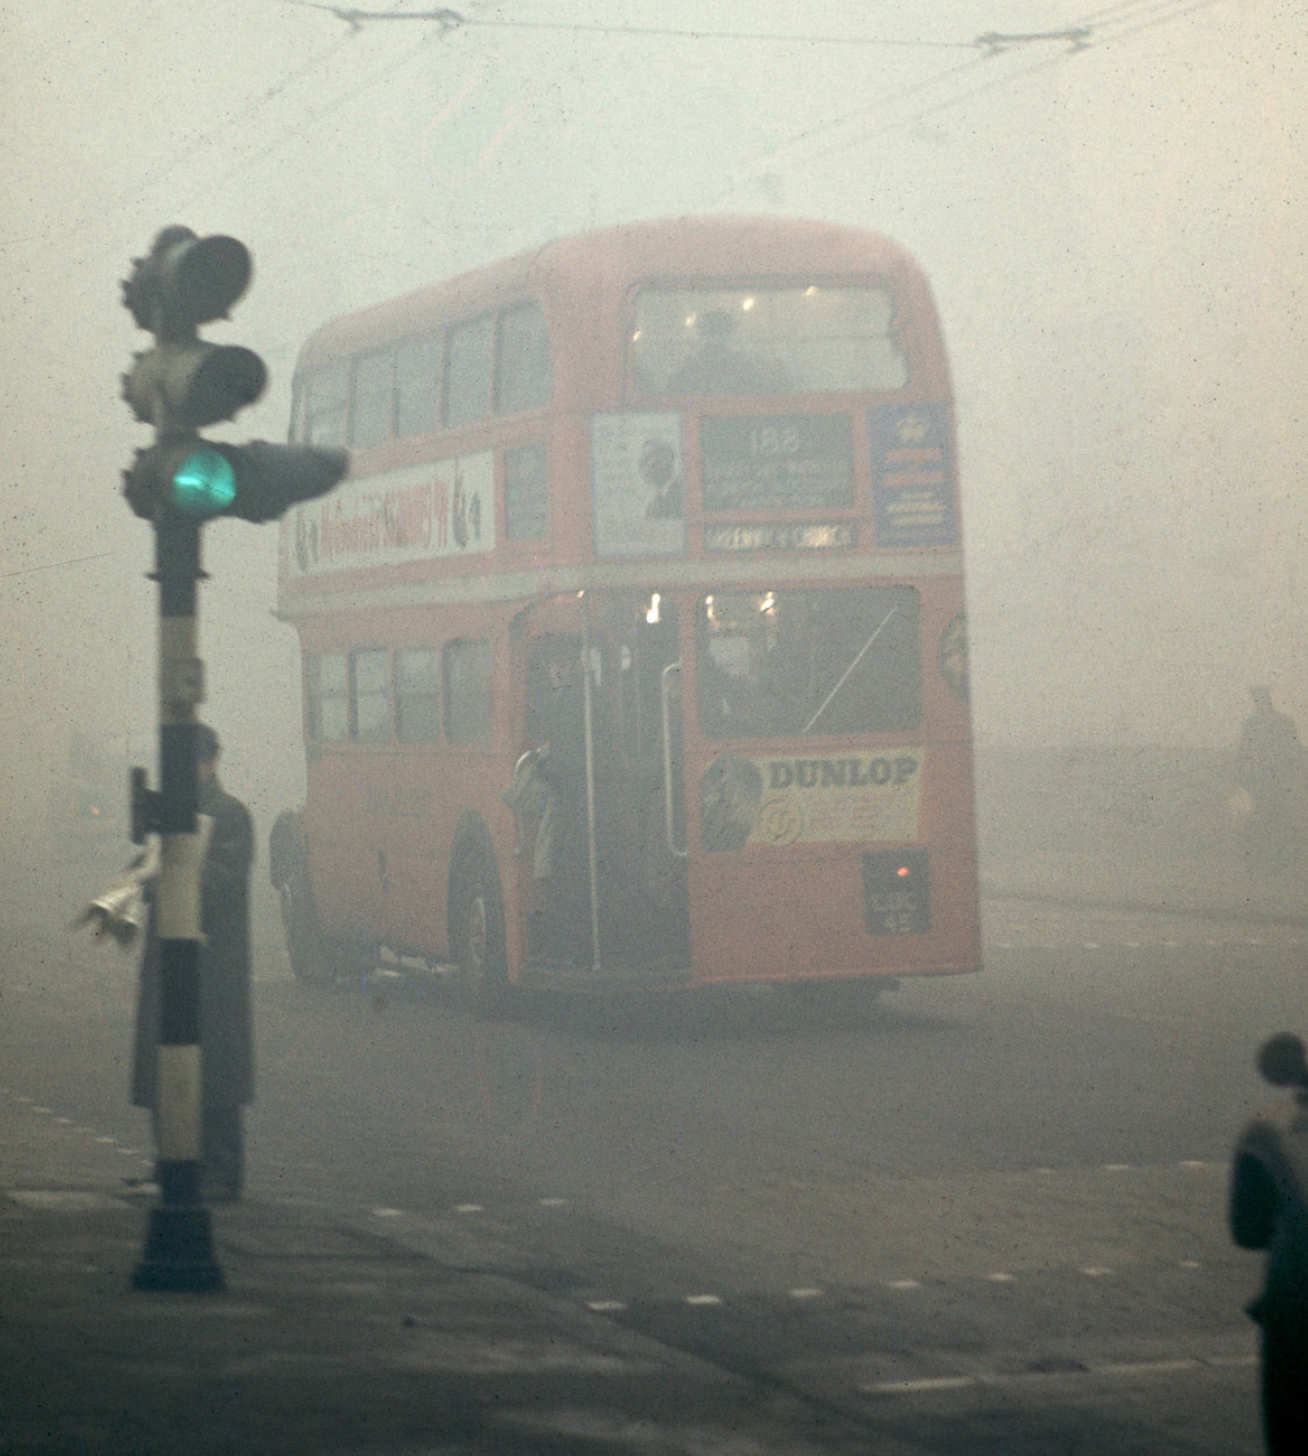 Photo depicts the back of a bus driving through a London smog in 1952